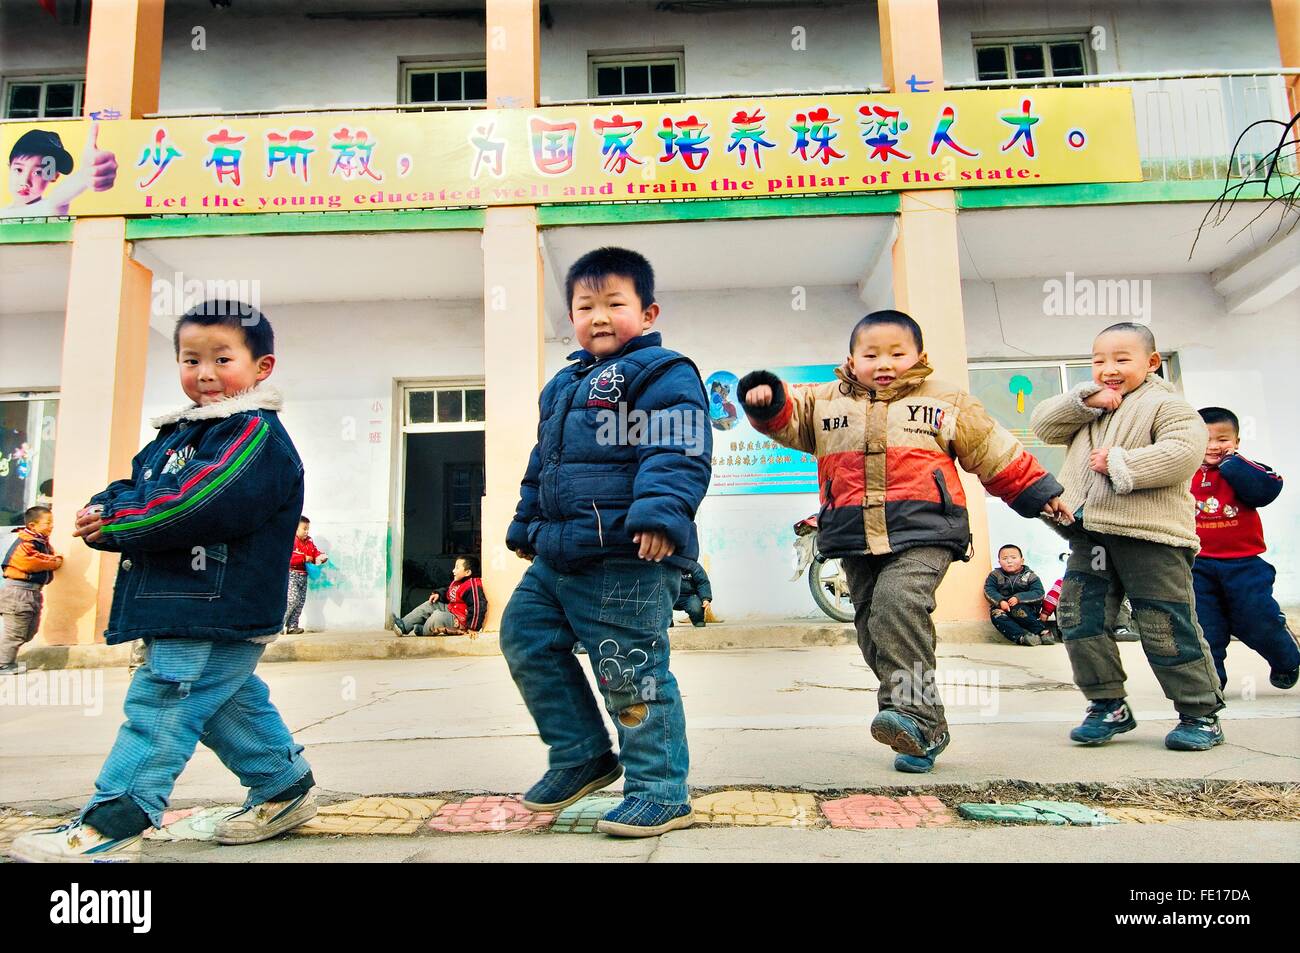 Chinese children boys in Kindergarten school in rural farm village town of Buyang near Jinan city in Shandong Province, China Stock Photo